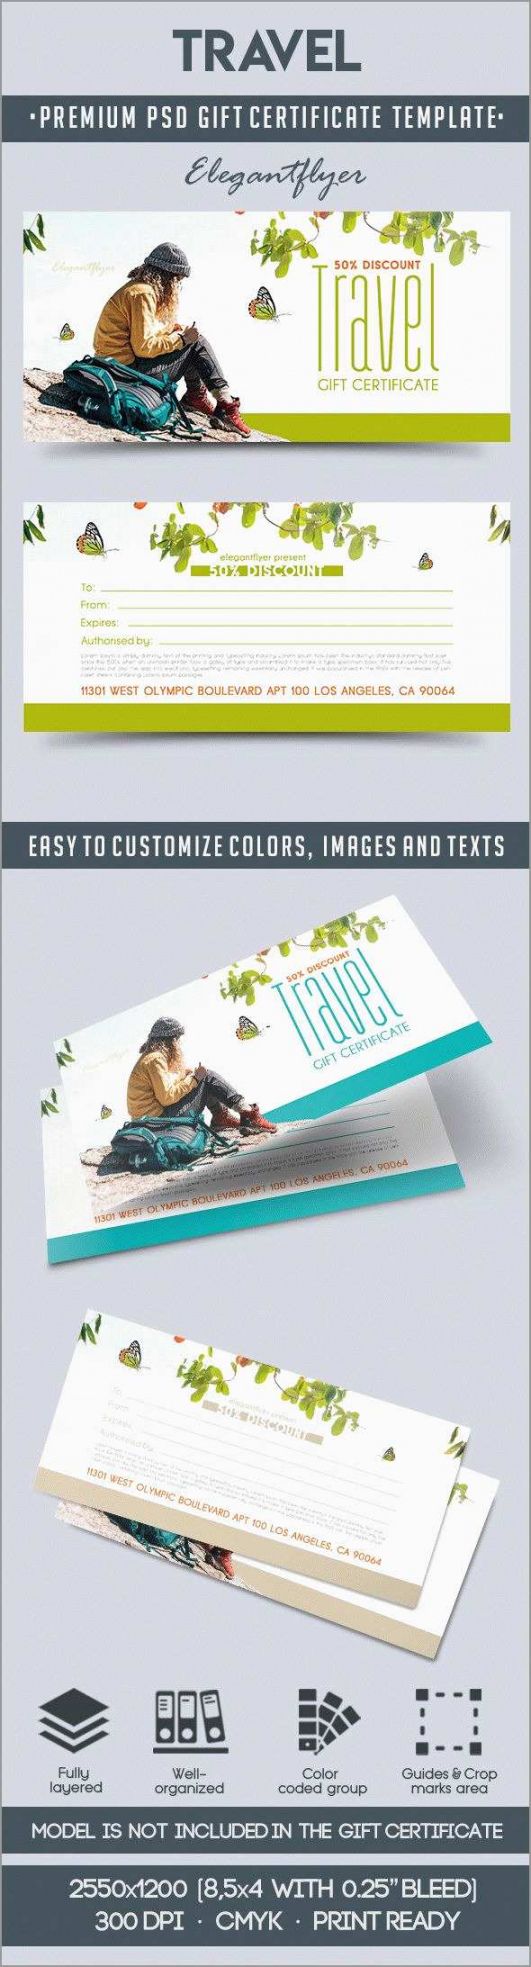 free vacation gift certificate template free prettier fishing gift fishing gift certificate template